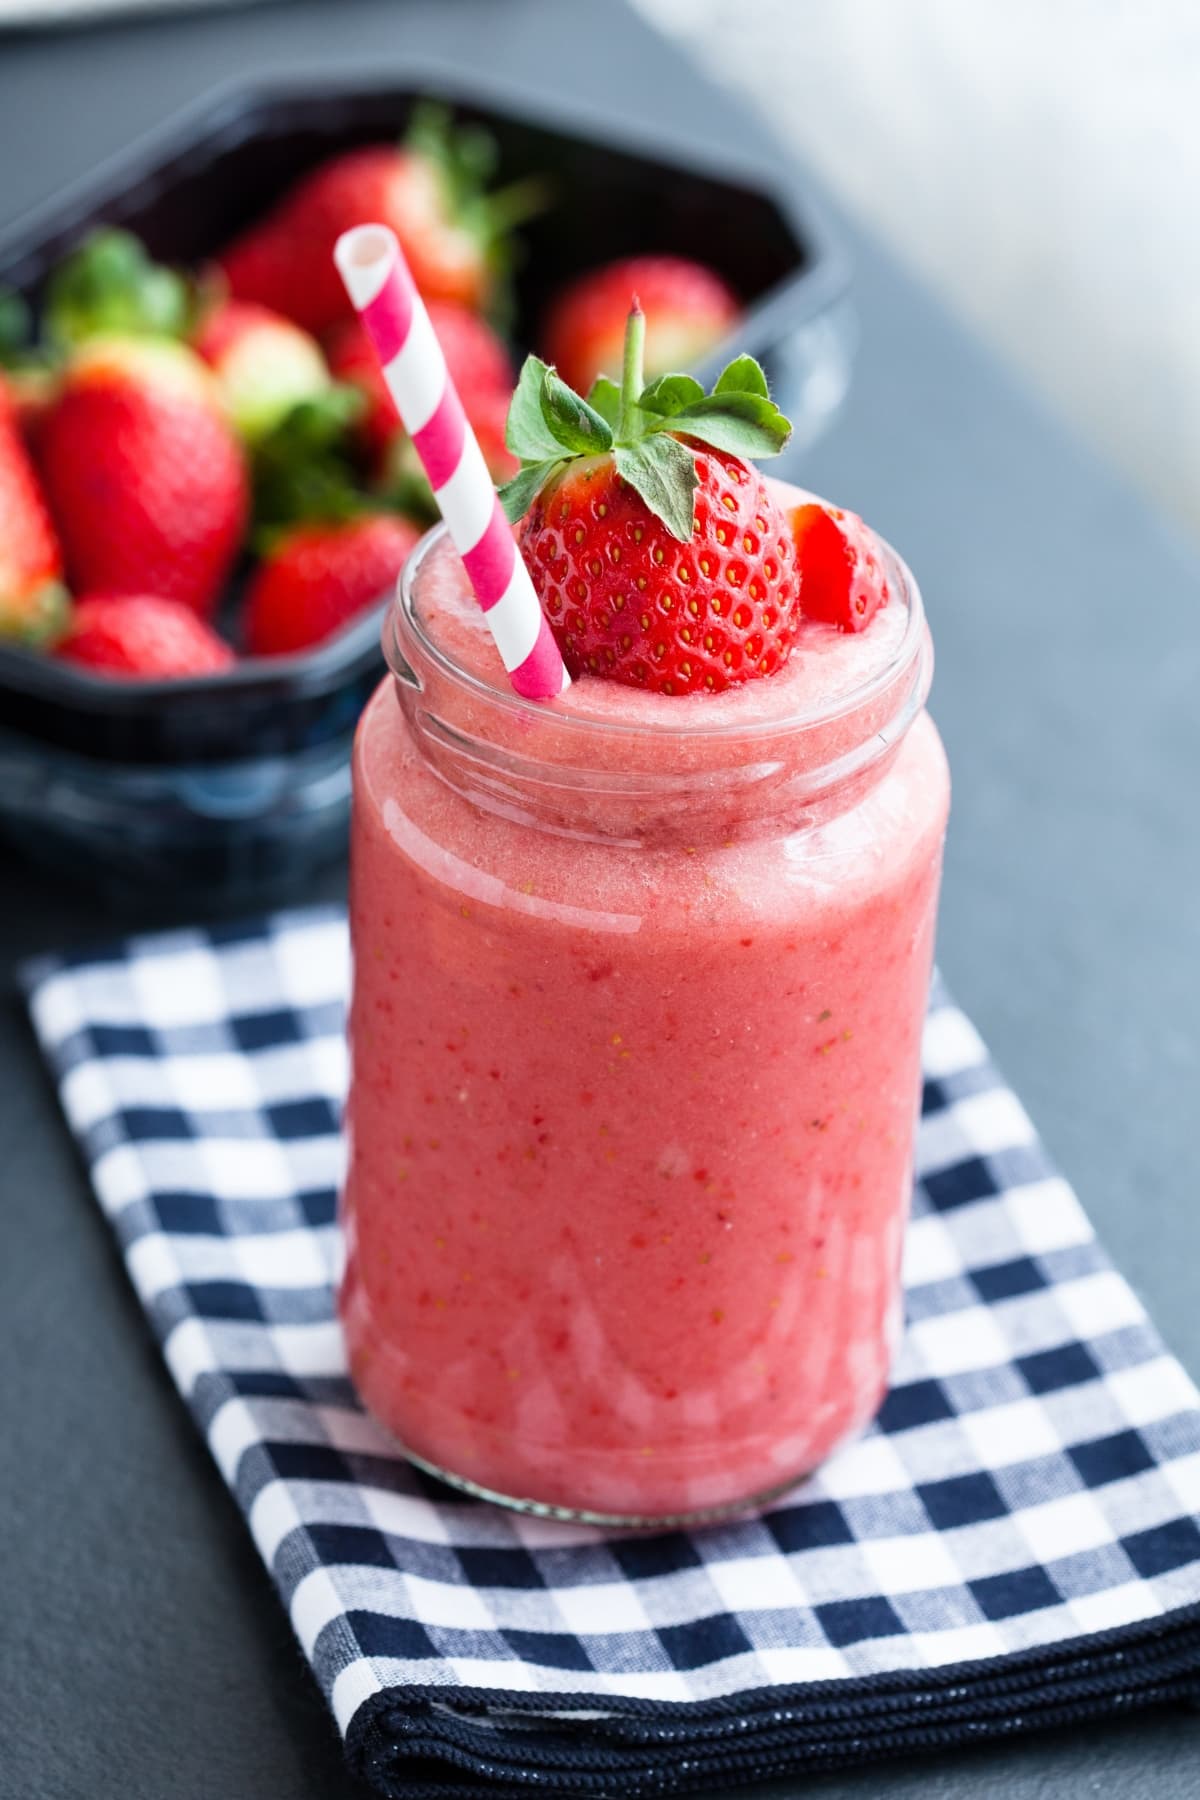 Homemade Strawberry Smoothie in a Glass Jar